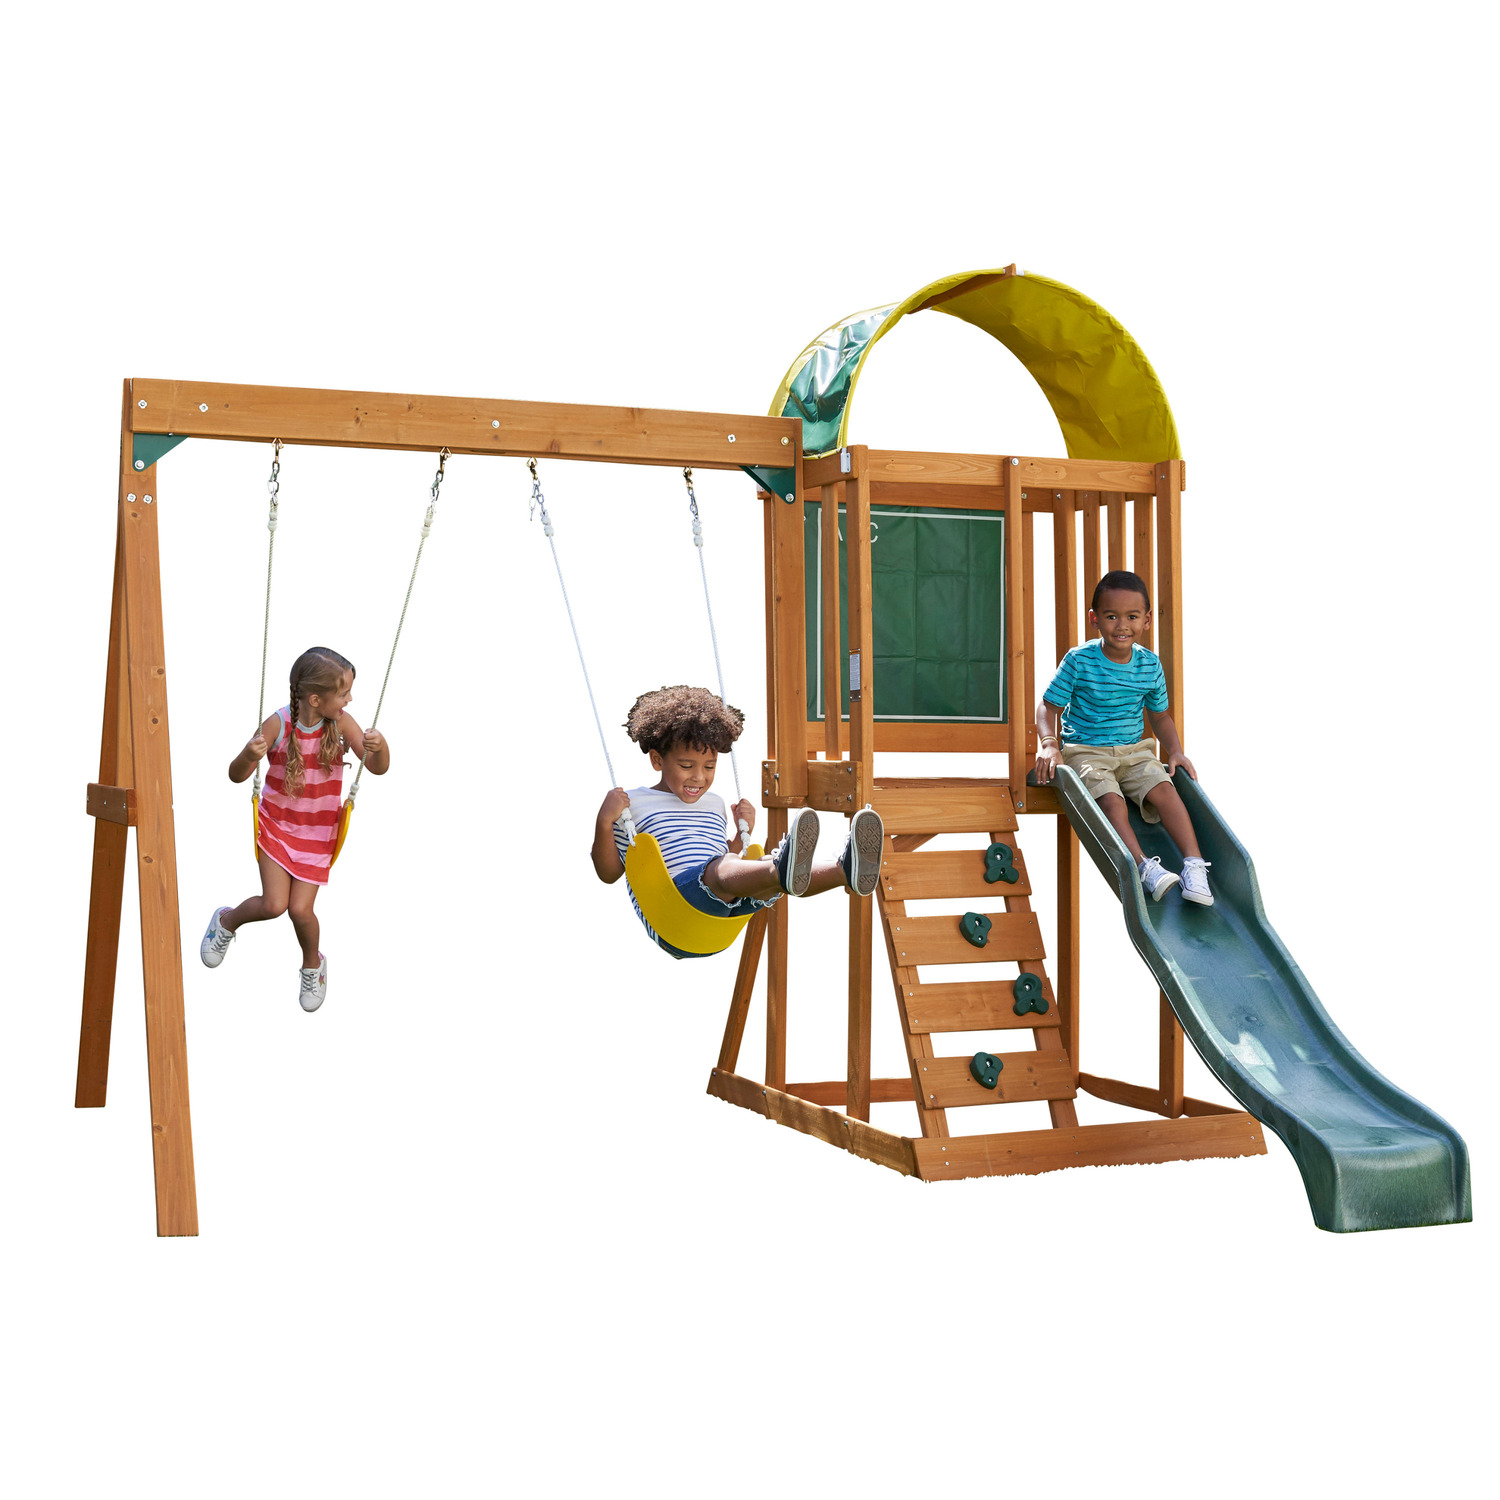 Kidkraft Ainsley Wooden Outdoor Swing Set with Slide, Chalk Wall, Canopy and Roc